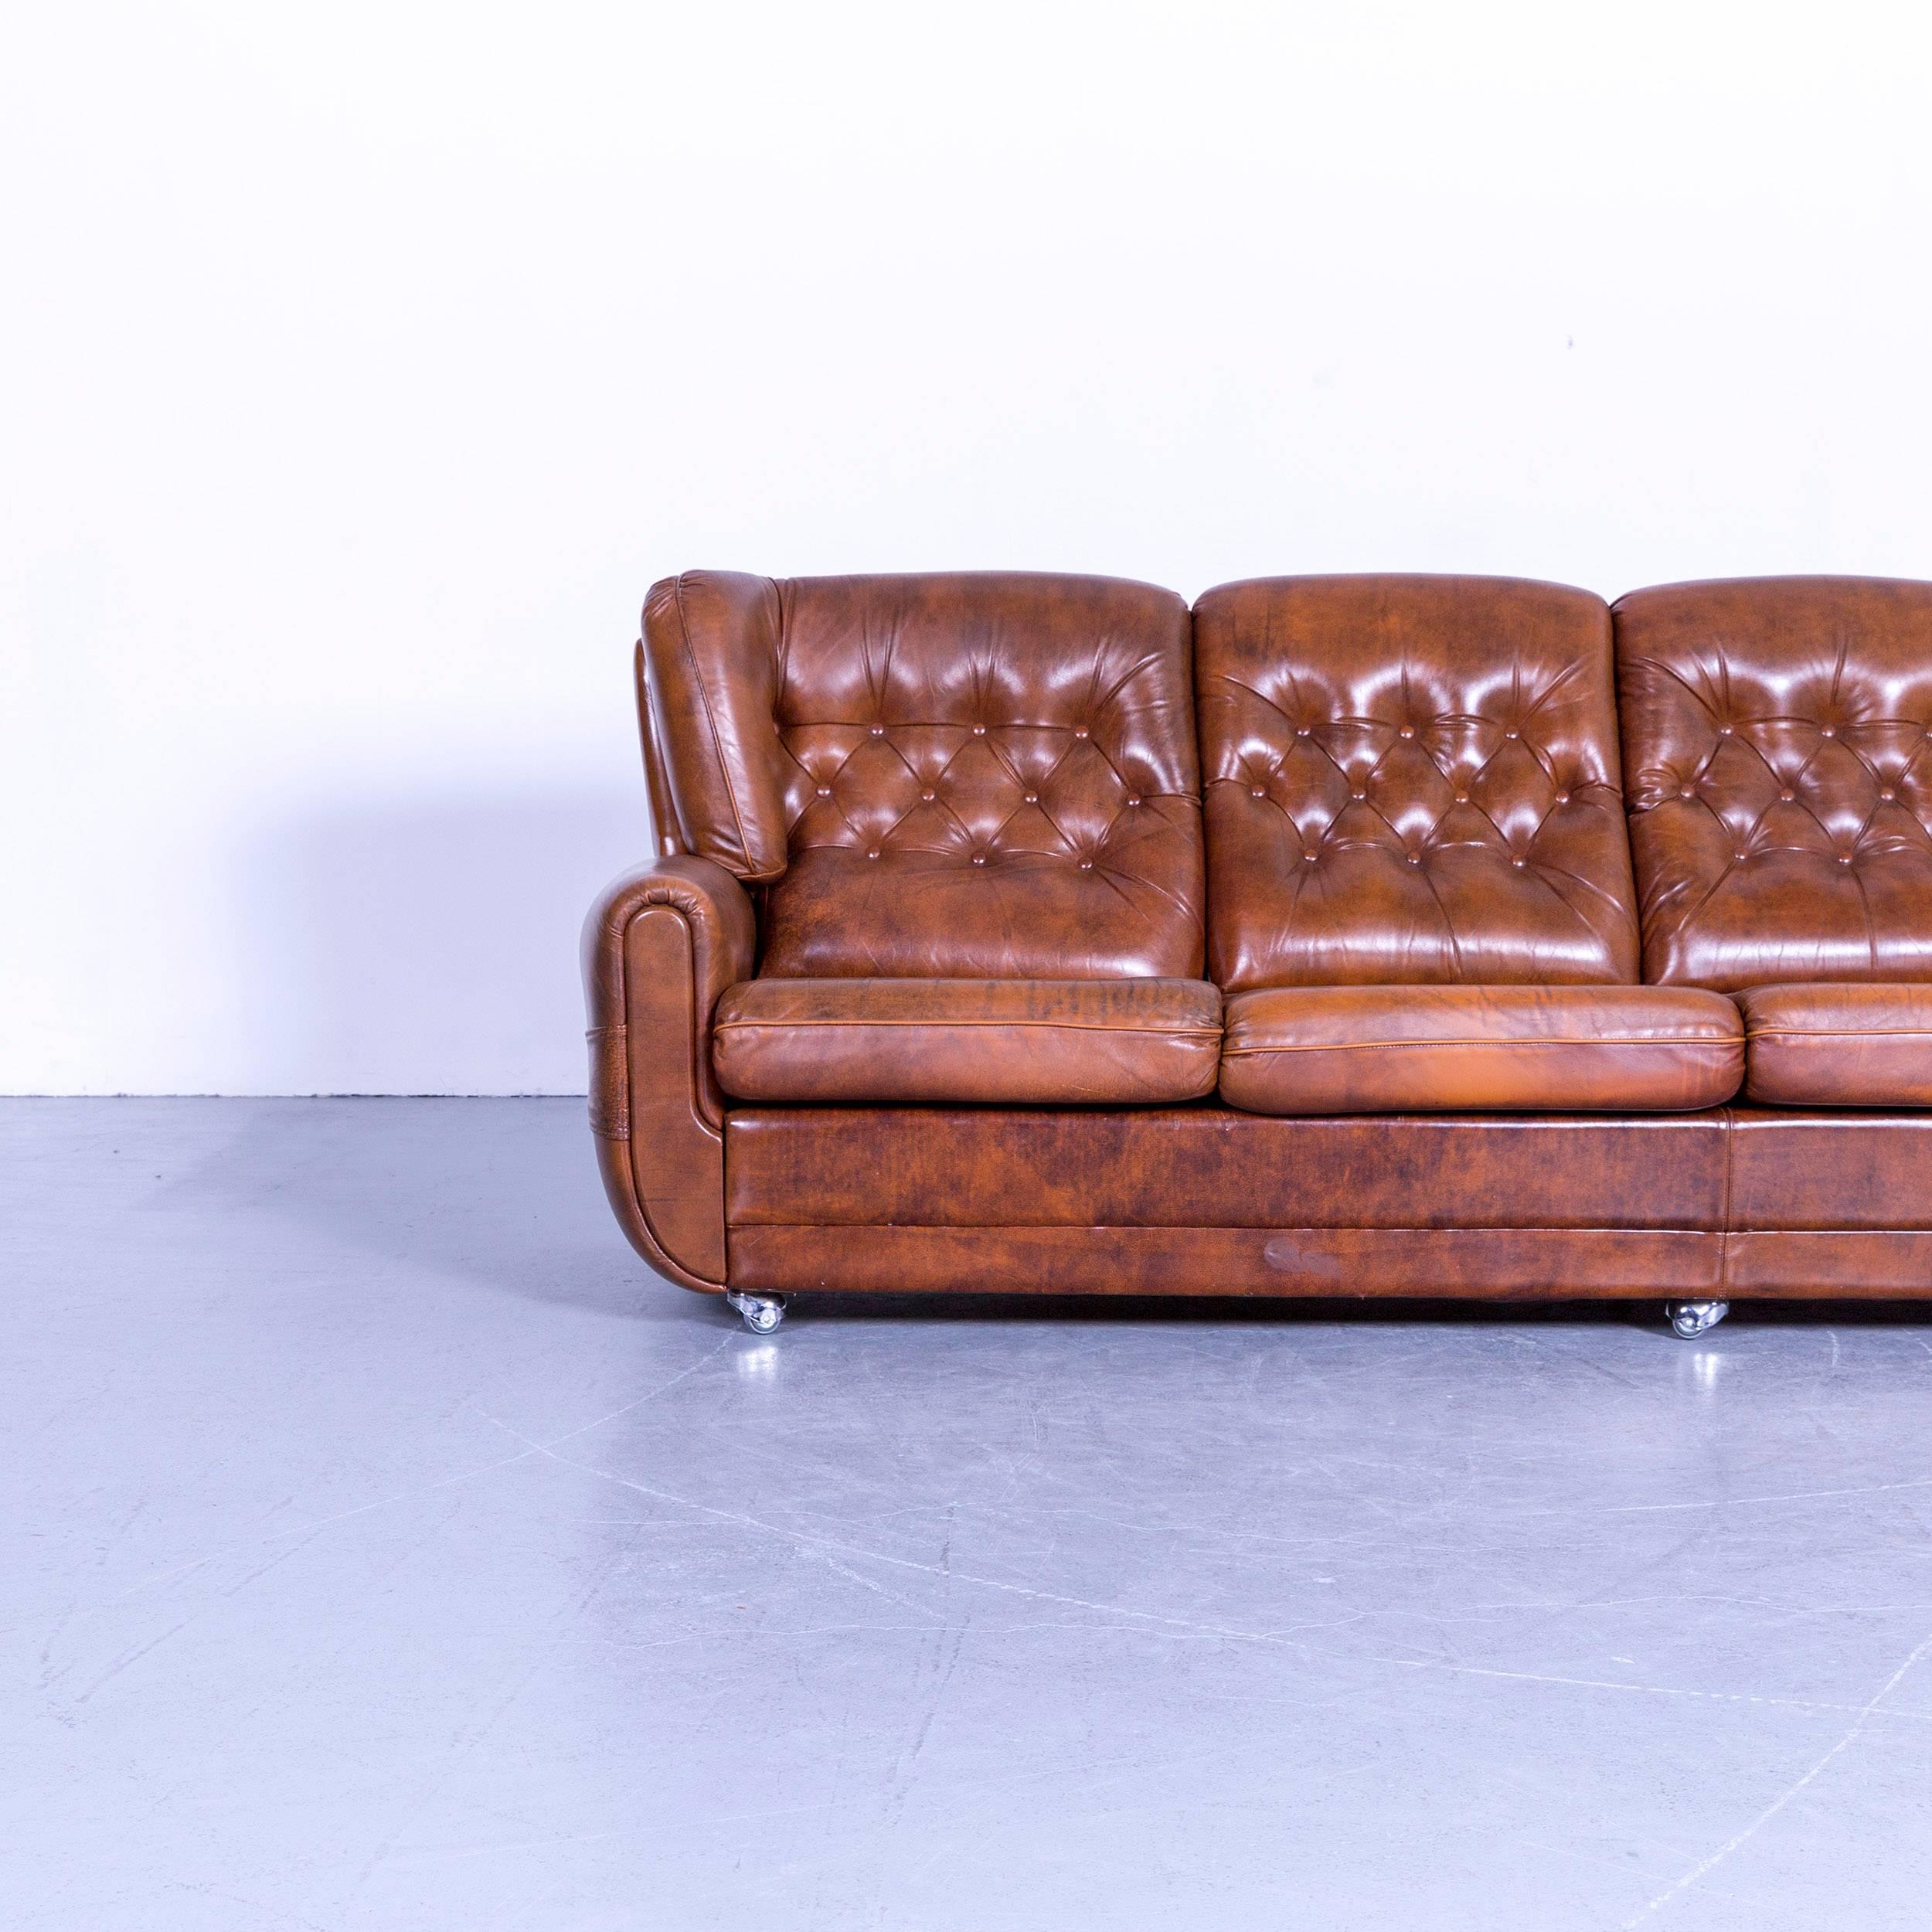 British Chesterfield Leather Sofa Brown Four-Seater Couch Vintage